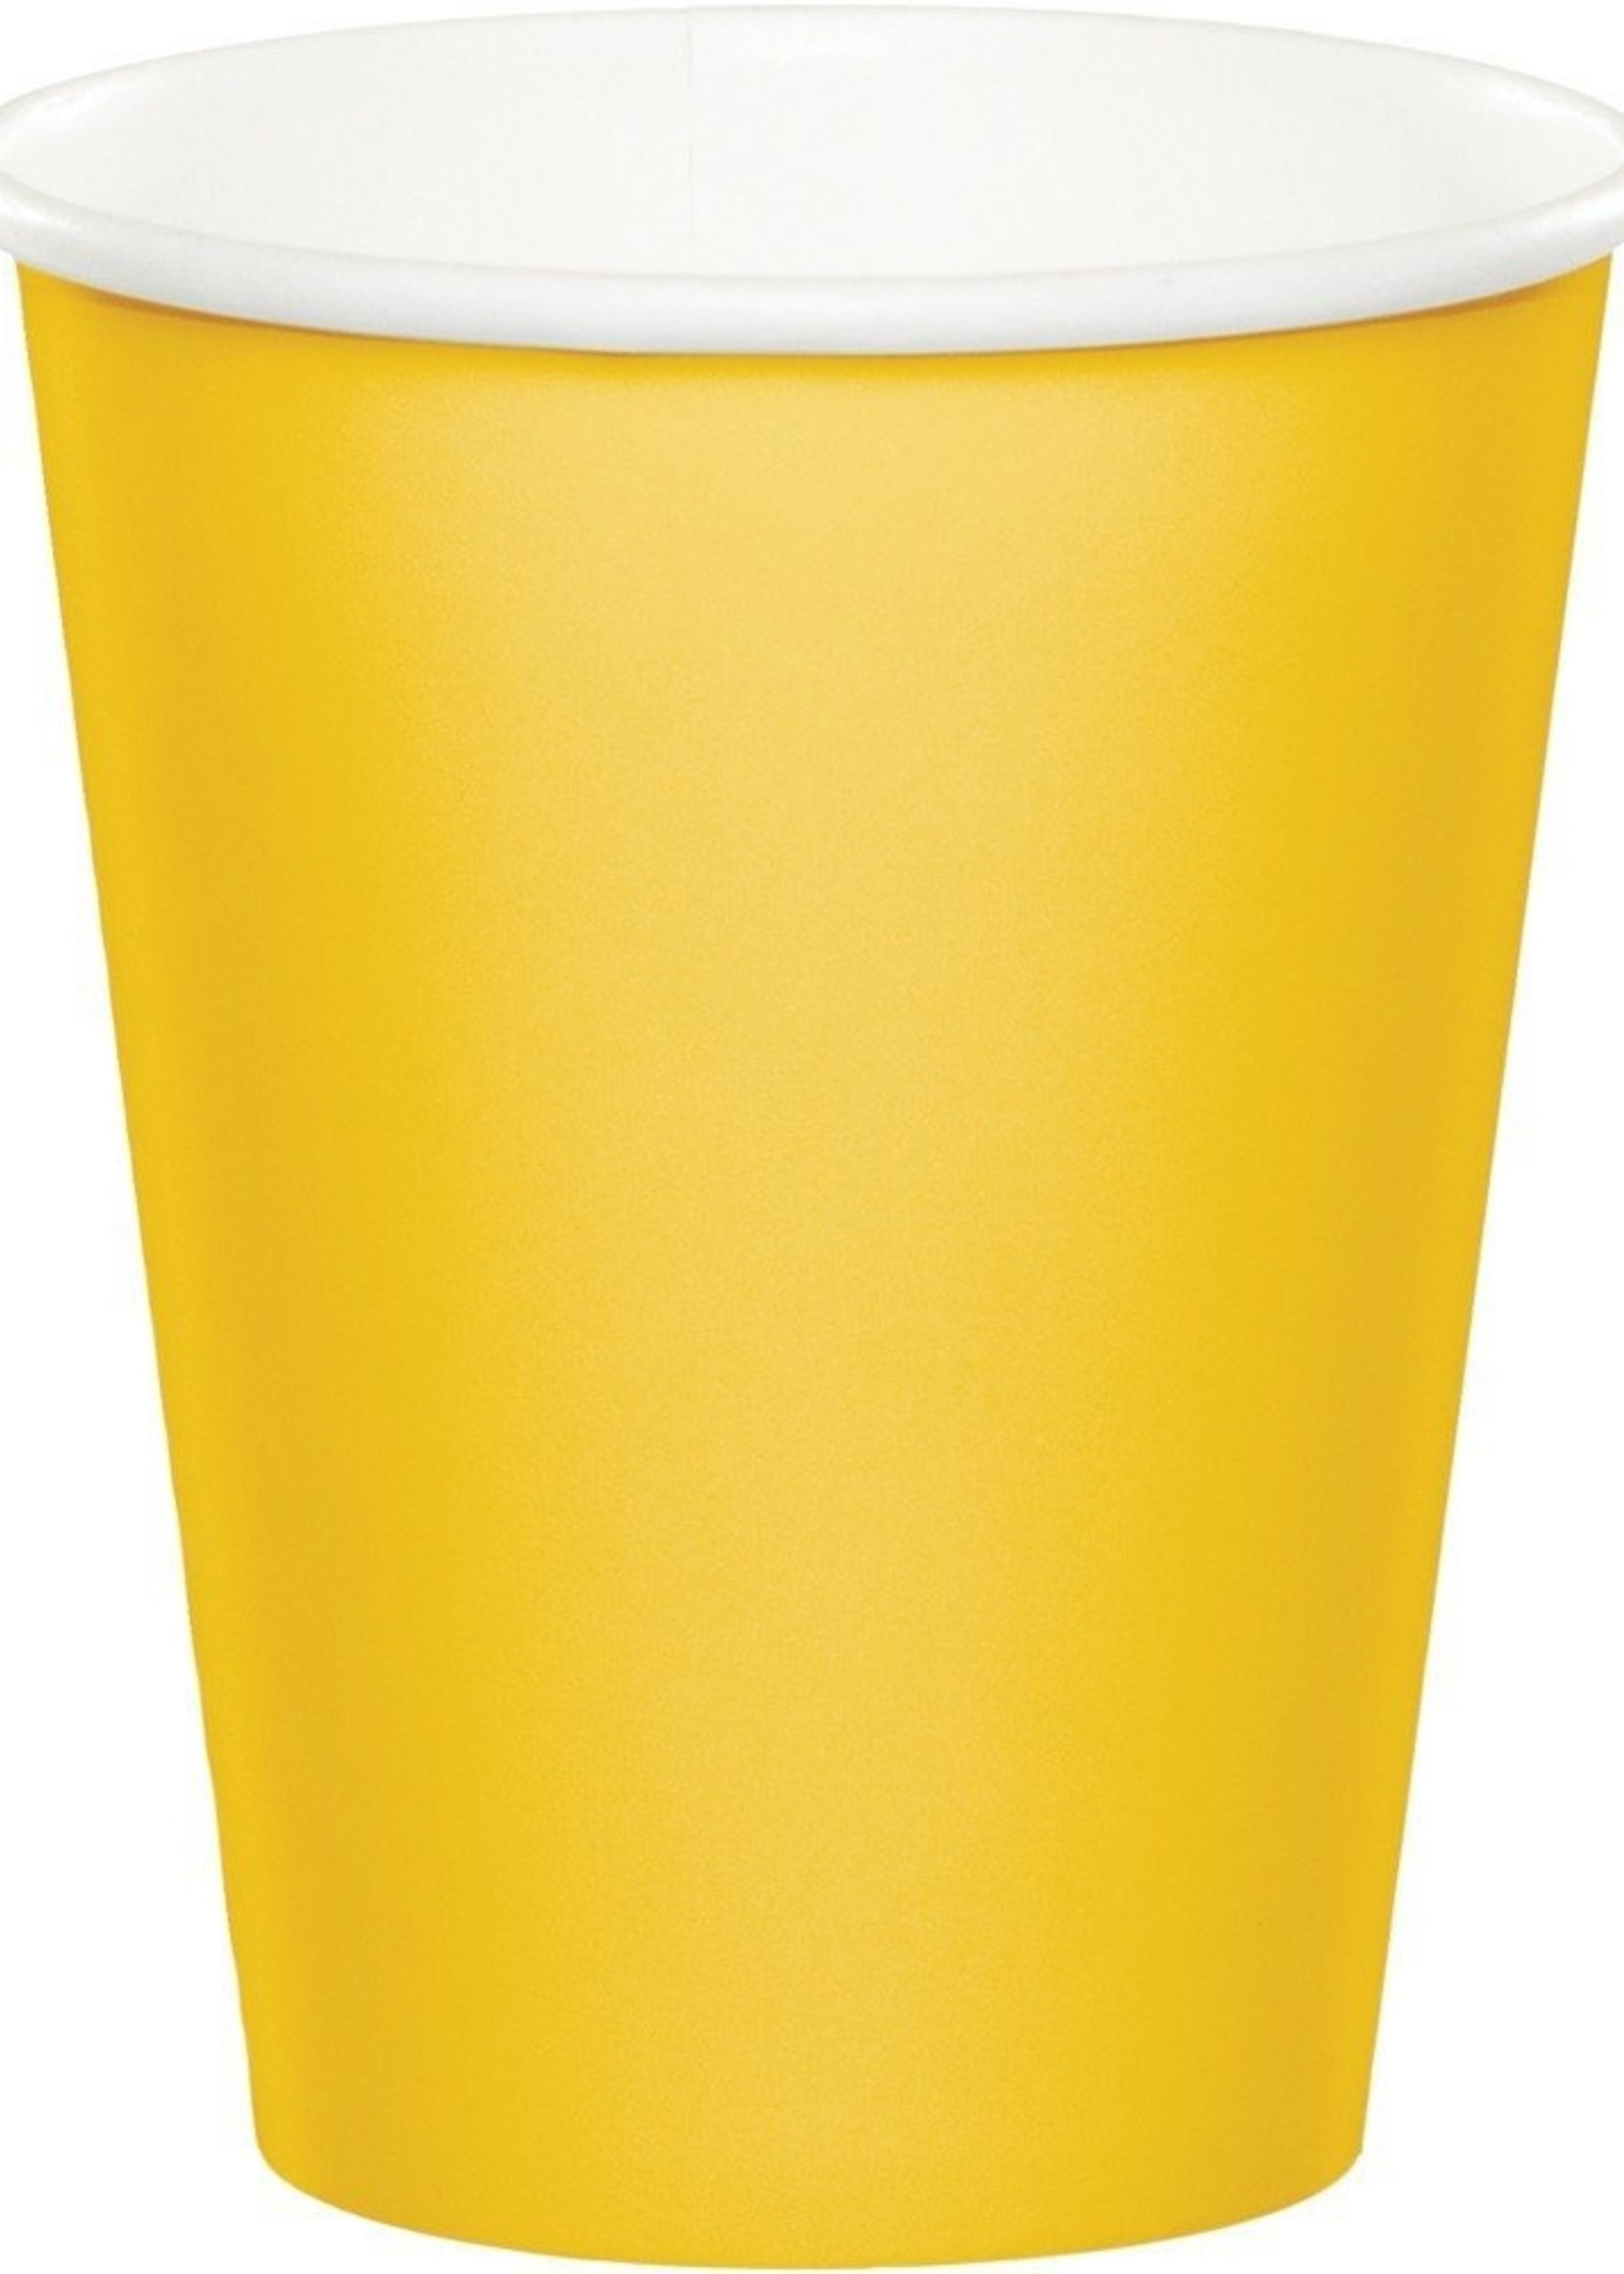 SCHOOL BUS YELLOW 24CT CUP